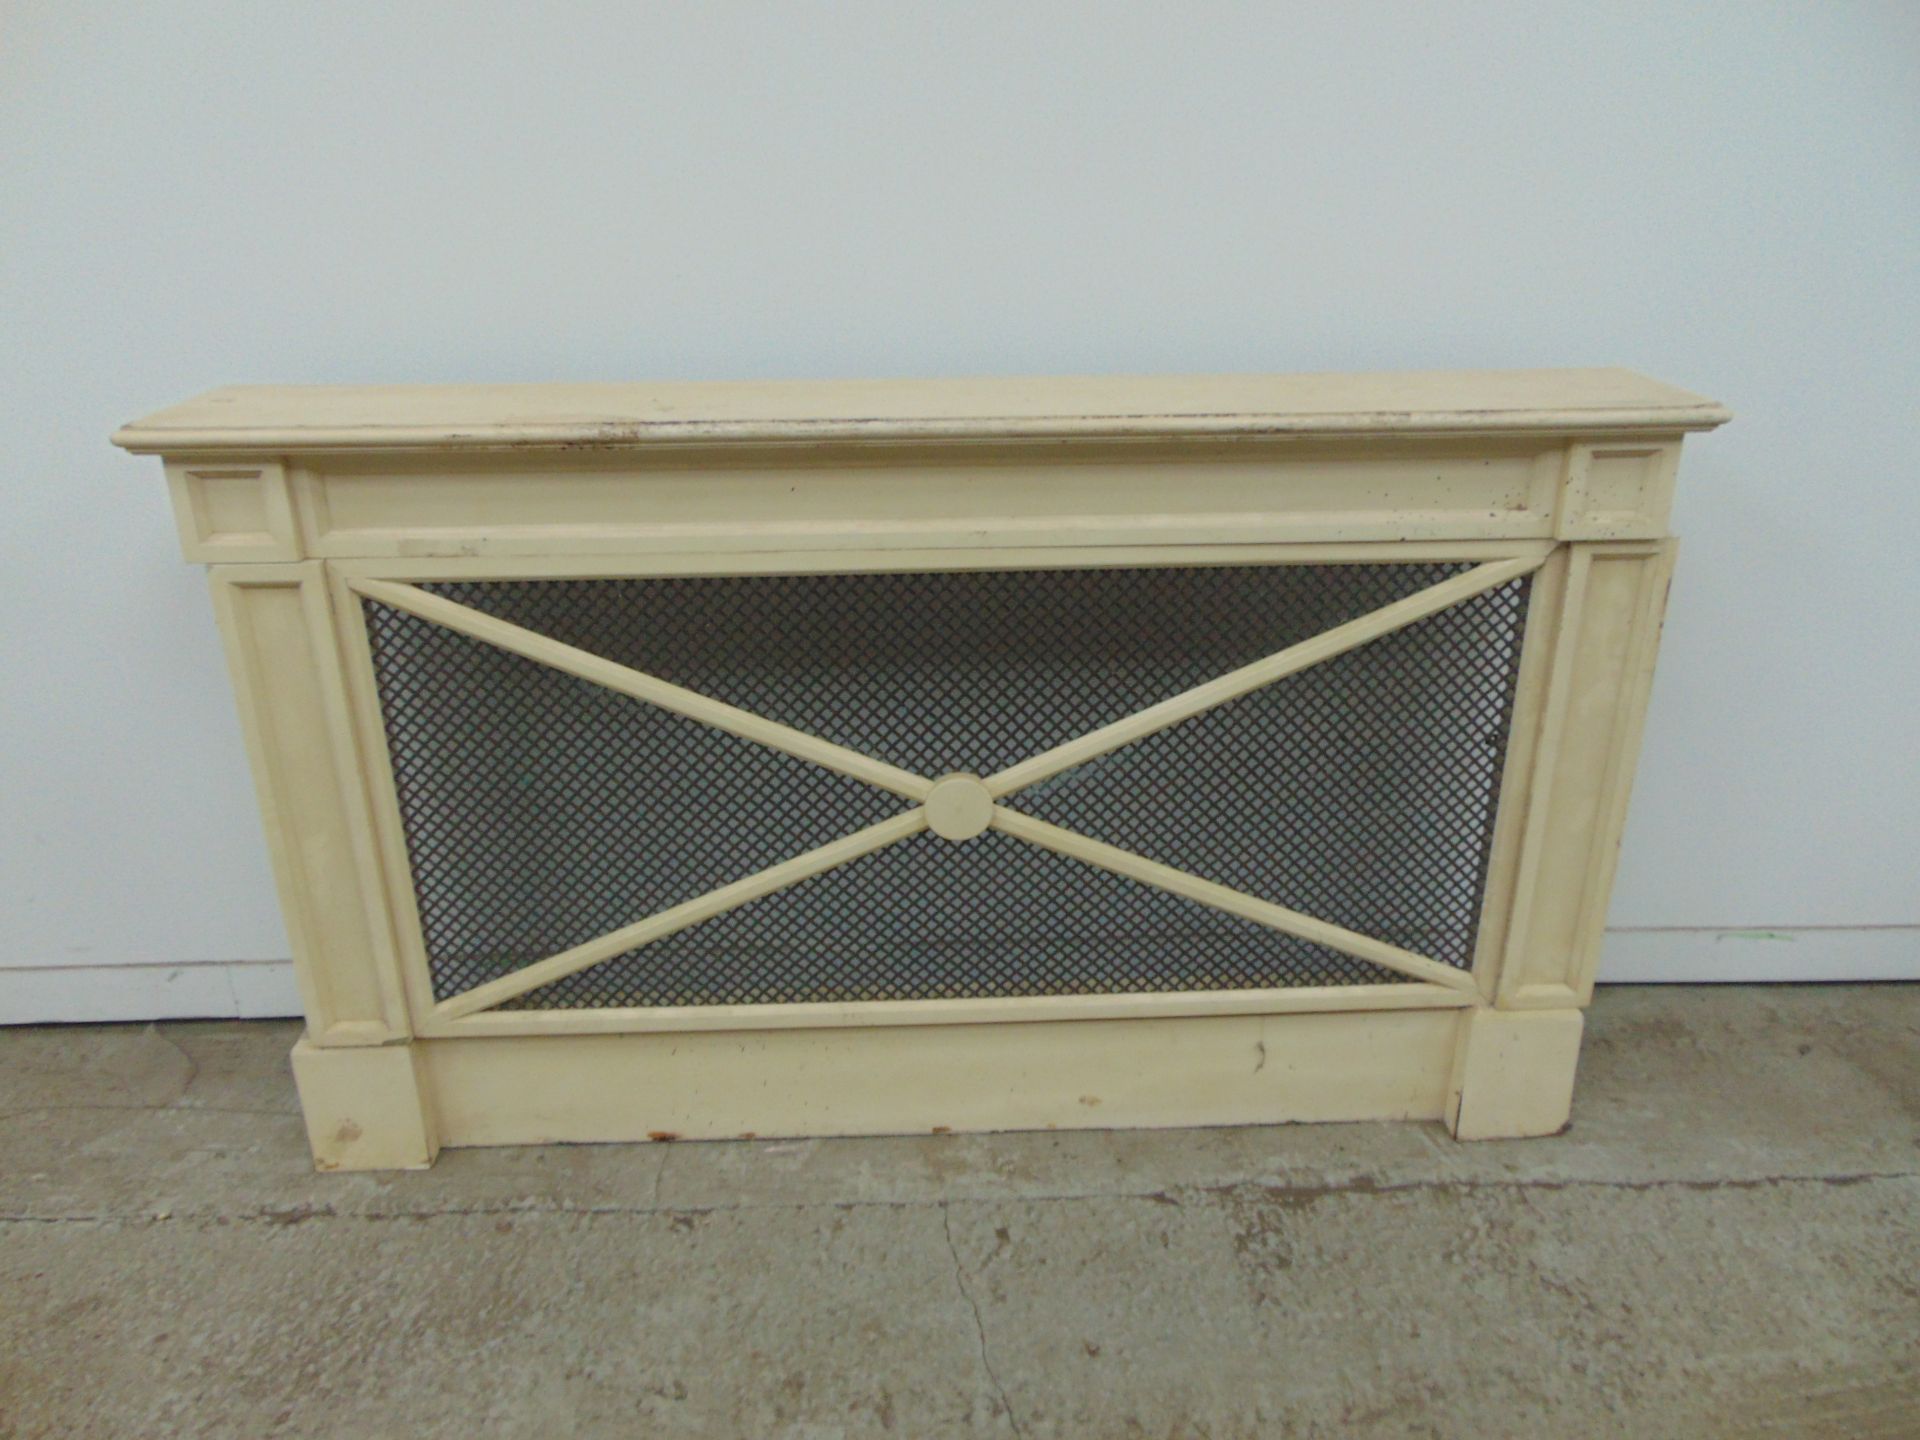 Large radiator cover in cream x 1680 wide x980 high x 250mm deep